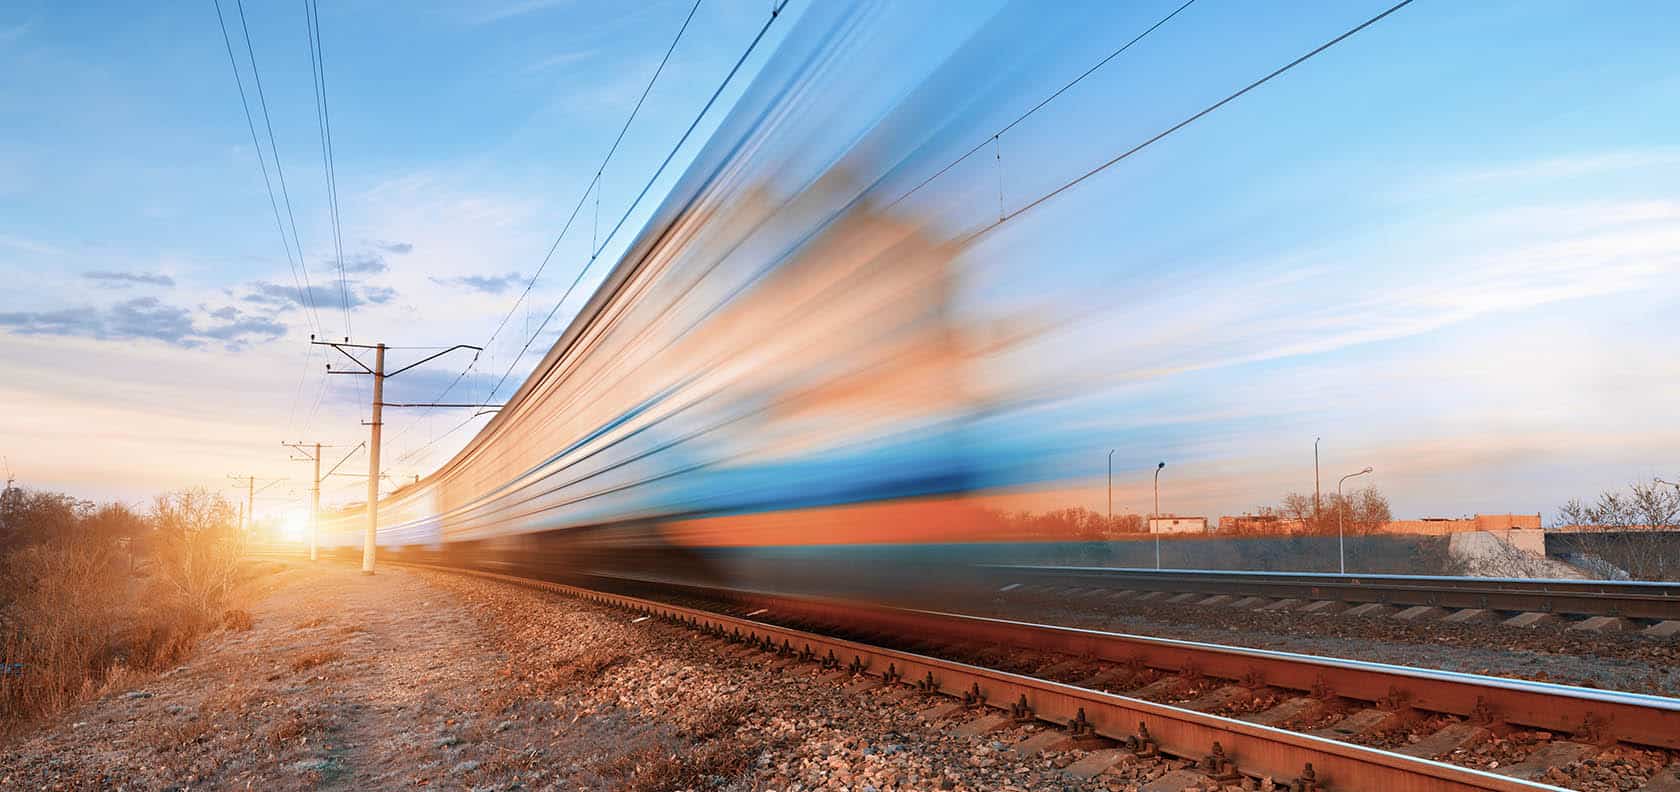 High Speed Train In Motion On Railroad Track